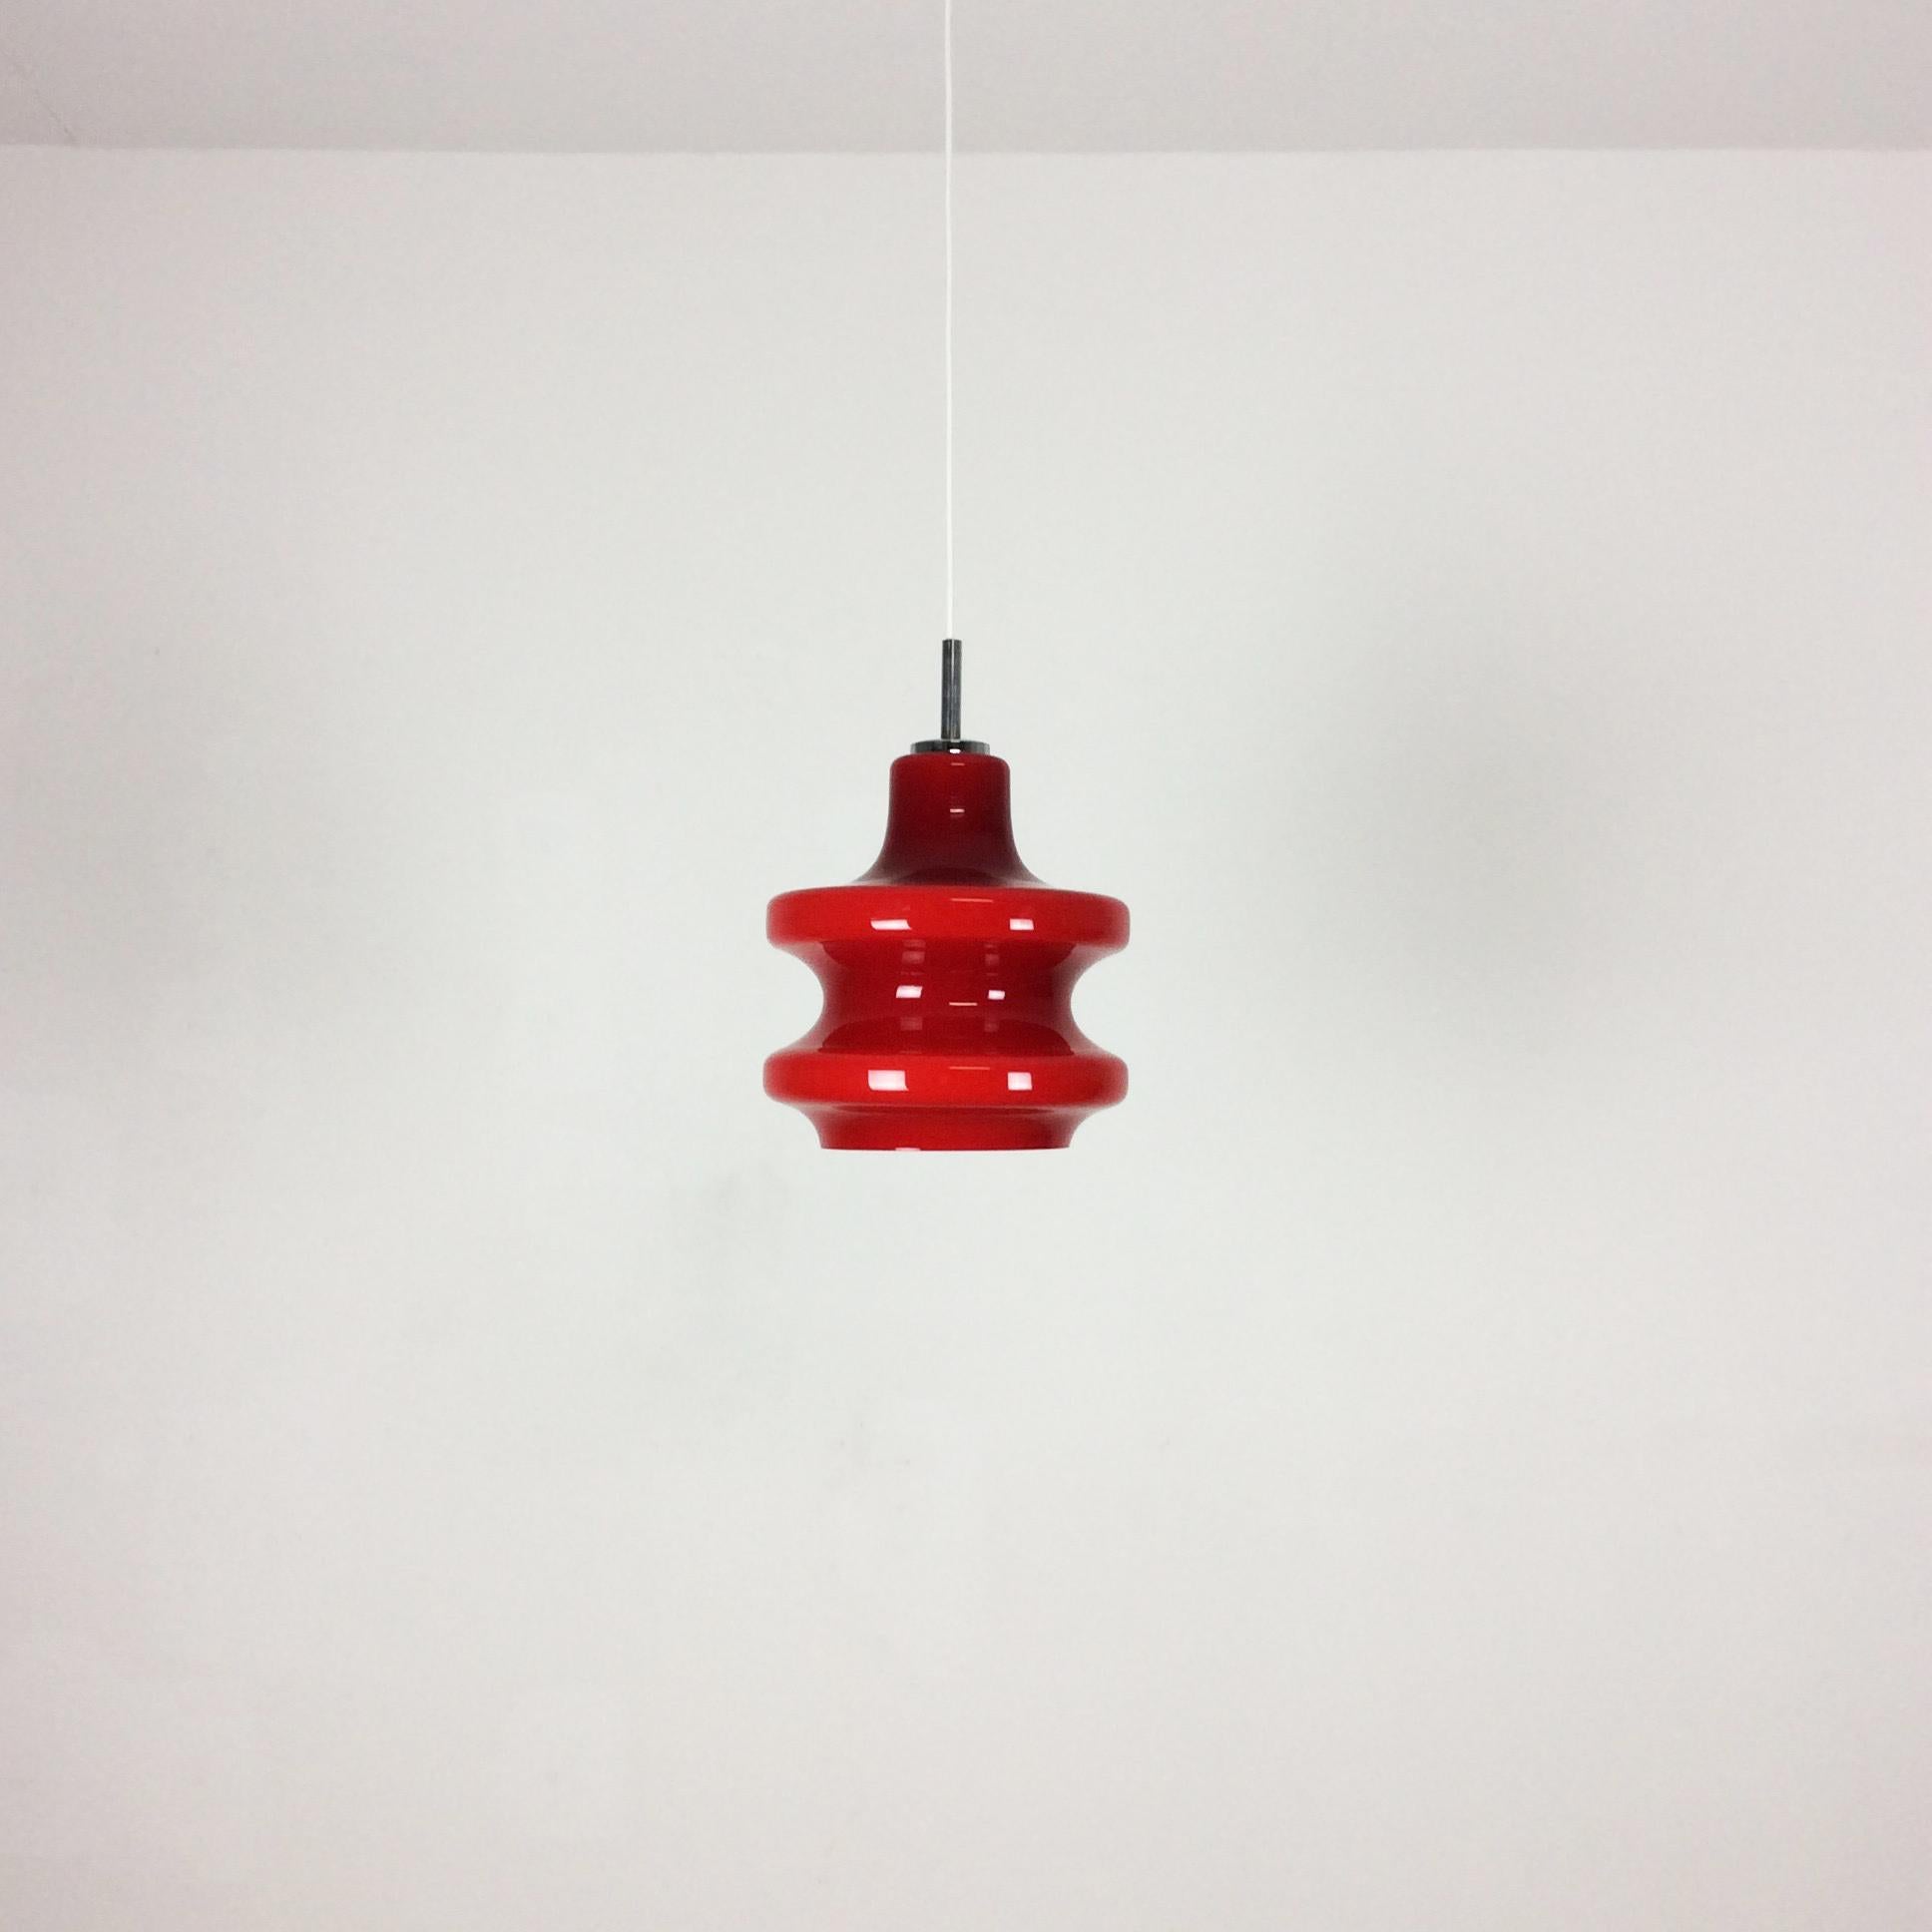 Article: Hanging light


Producer: Peill & Putzler


Origin: Germany


Age: 1970s 


This fantastic red hanging lights was designed and produced in 1970s in Germany by Peill & Putzler. The shade is made of high quality German handblown